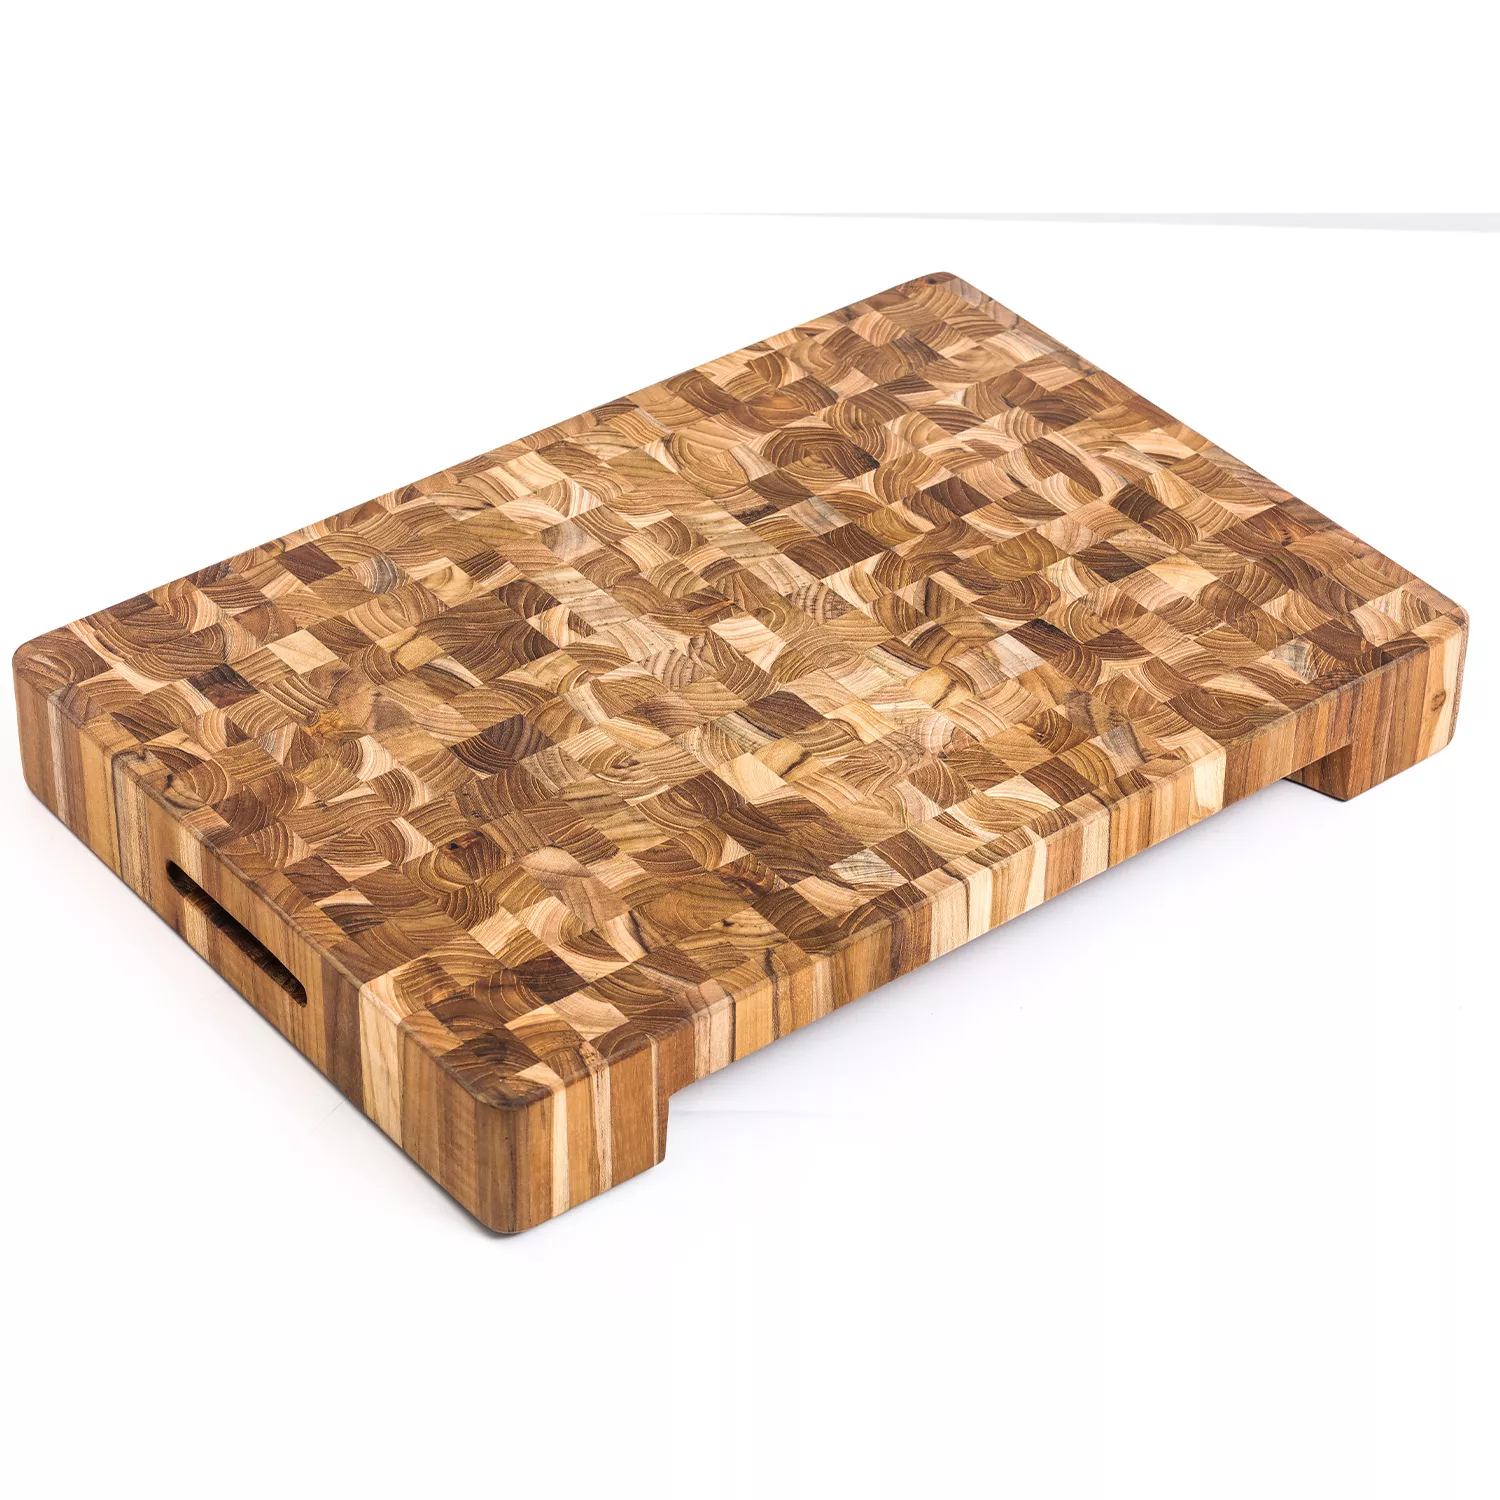  Teakhaus Carving Board - Large Wood Cutting Board with Juice  Groove and Grip Handles - Reversible Teak Edge Grain Wood - Knife Friendly  - FSC Certified: Proteak Edge Grain Teak Cutting